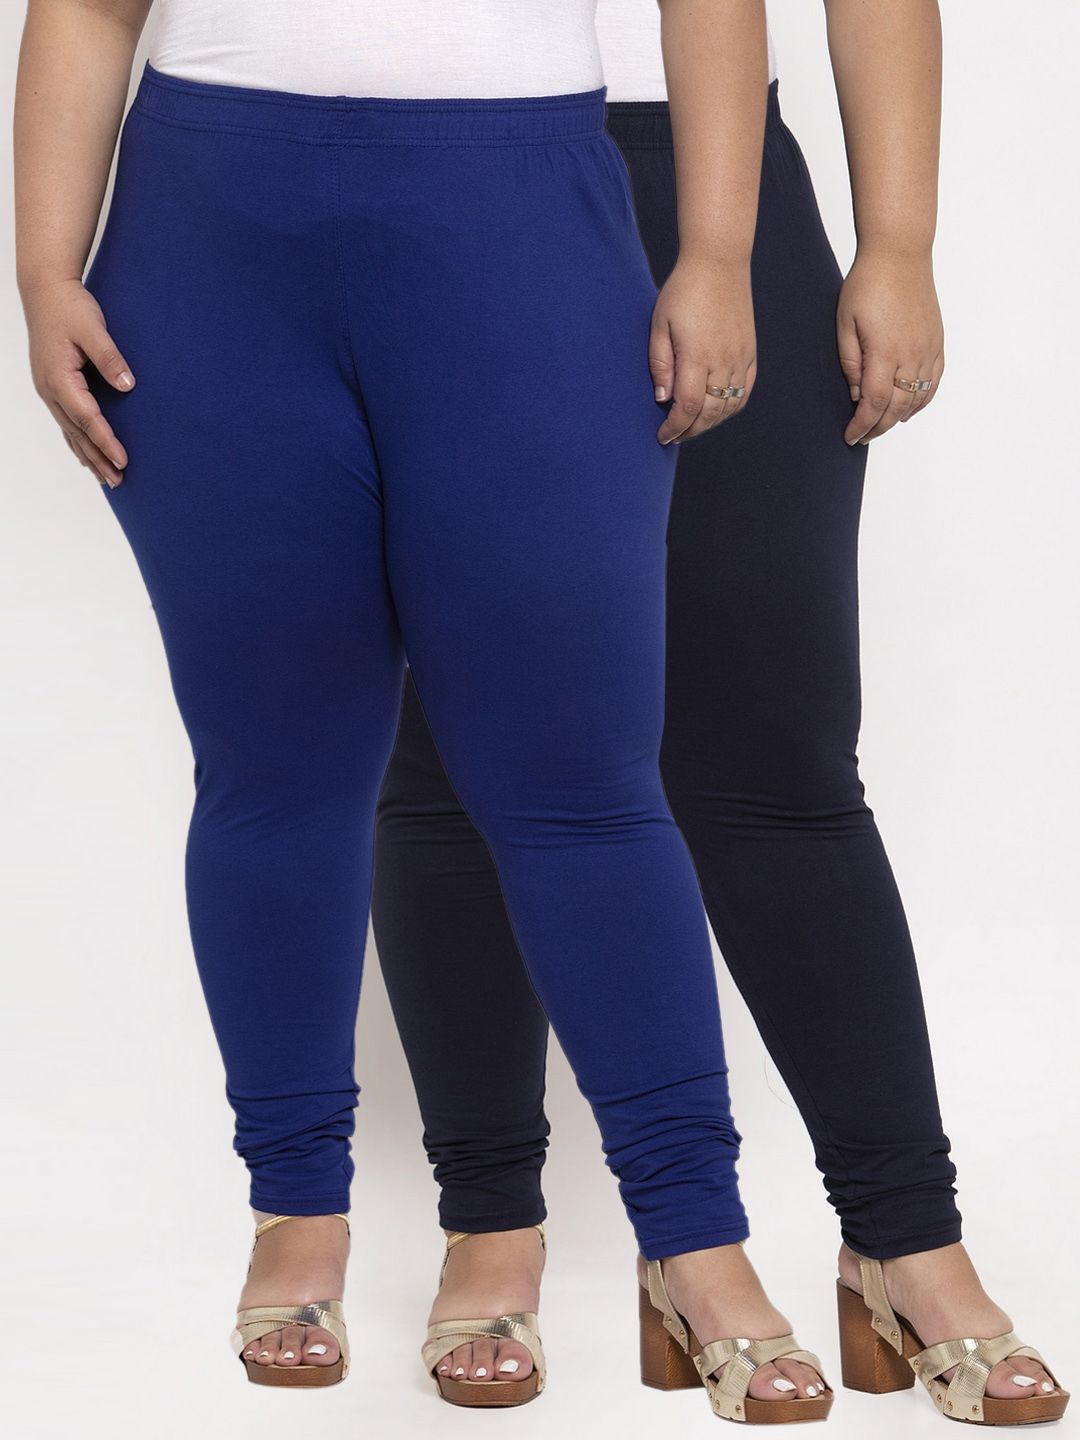 TAG 7 PLUS Women Pack Of 2 Solid Plus Size Ankle-Length Leggings Price in India